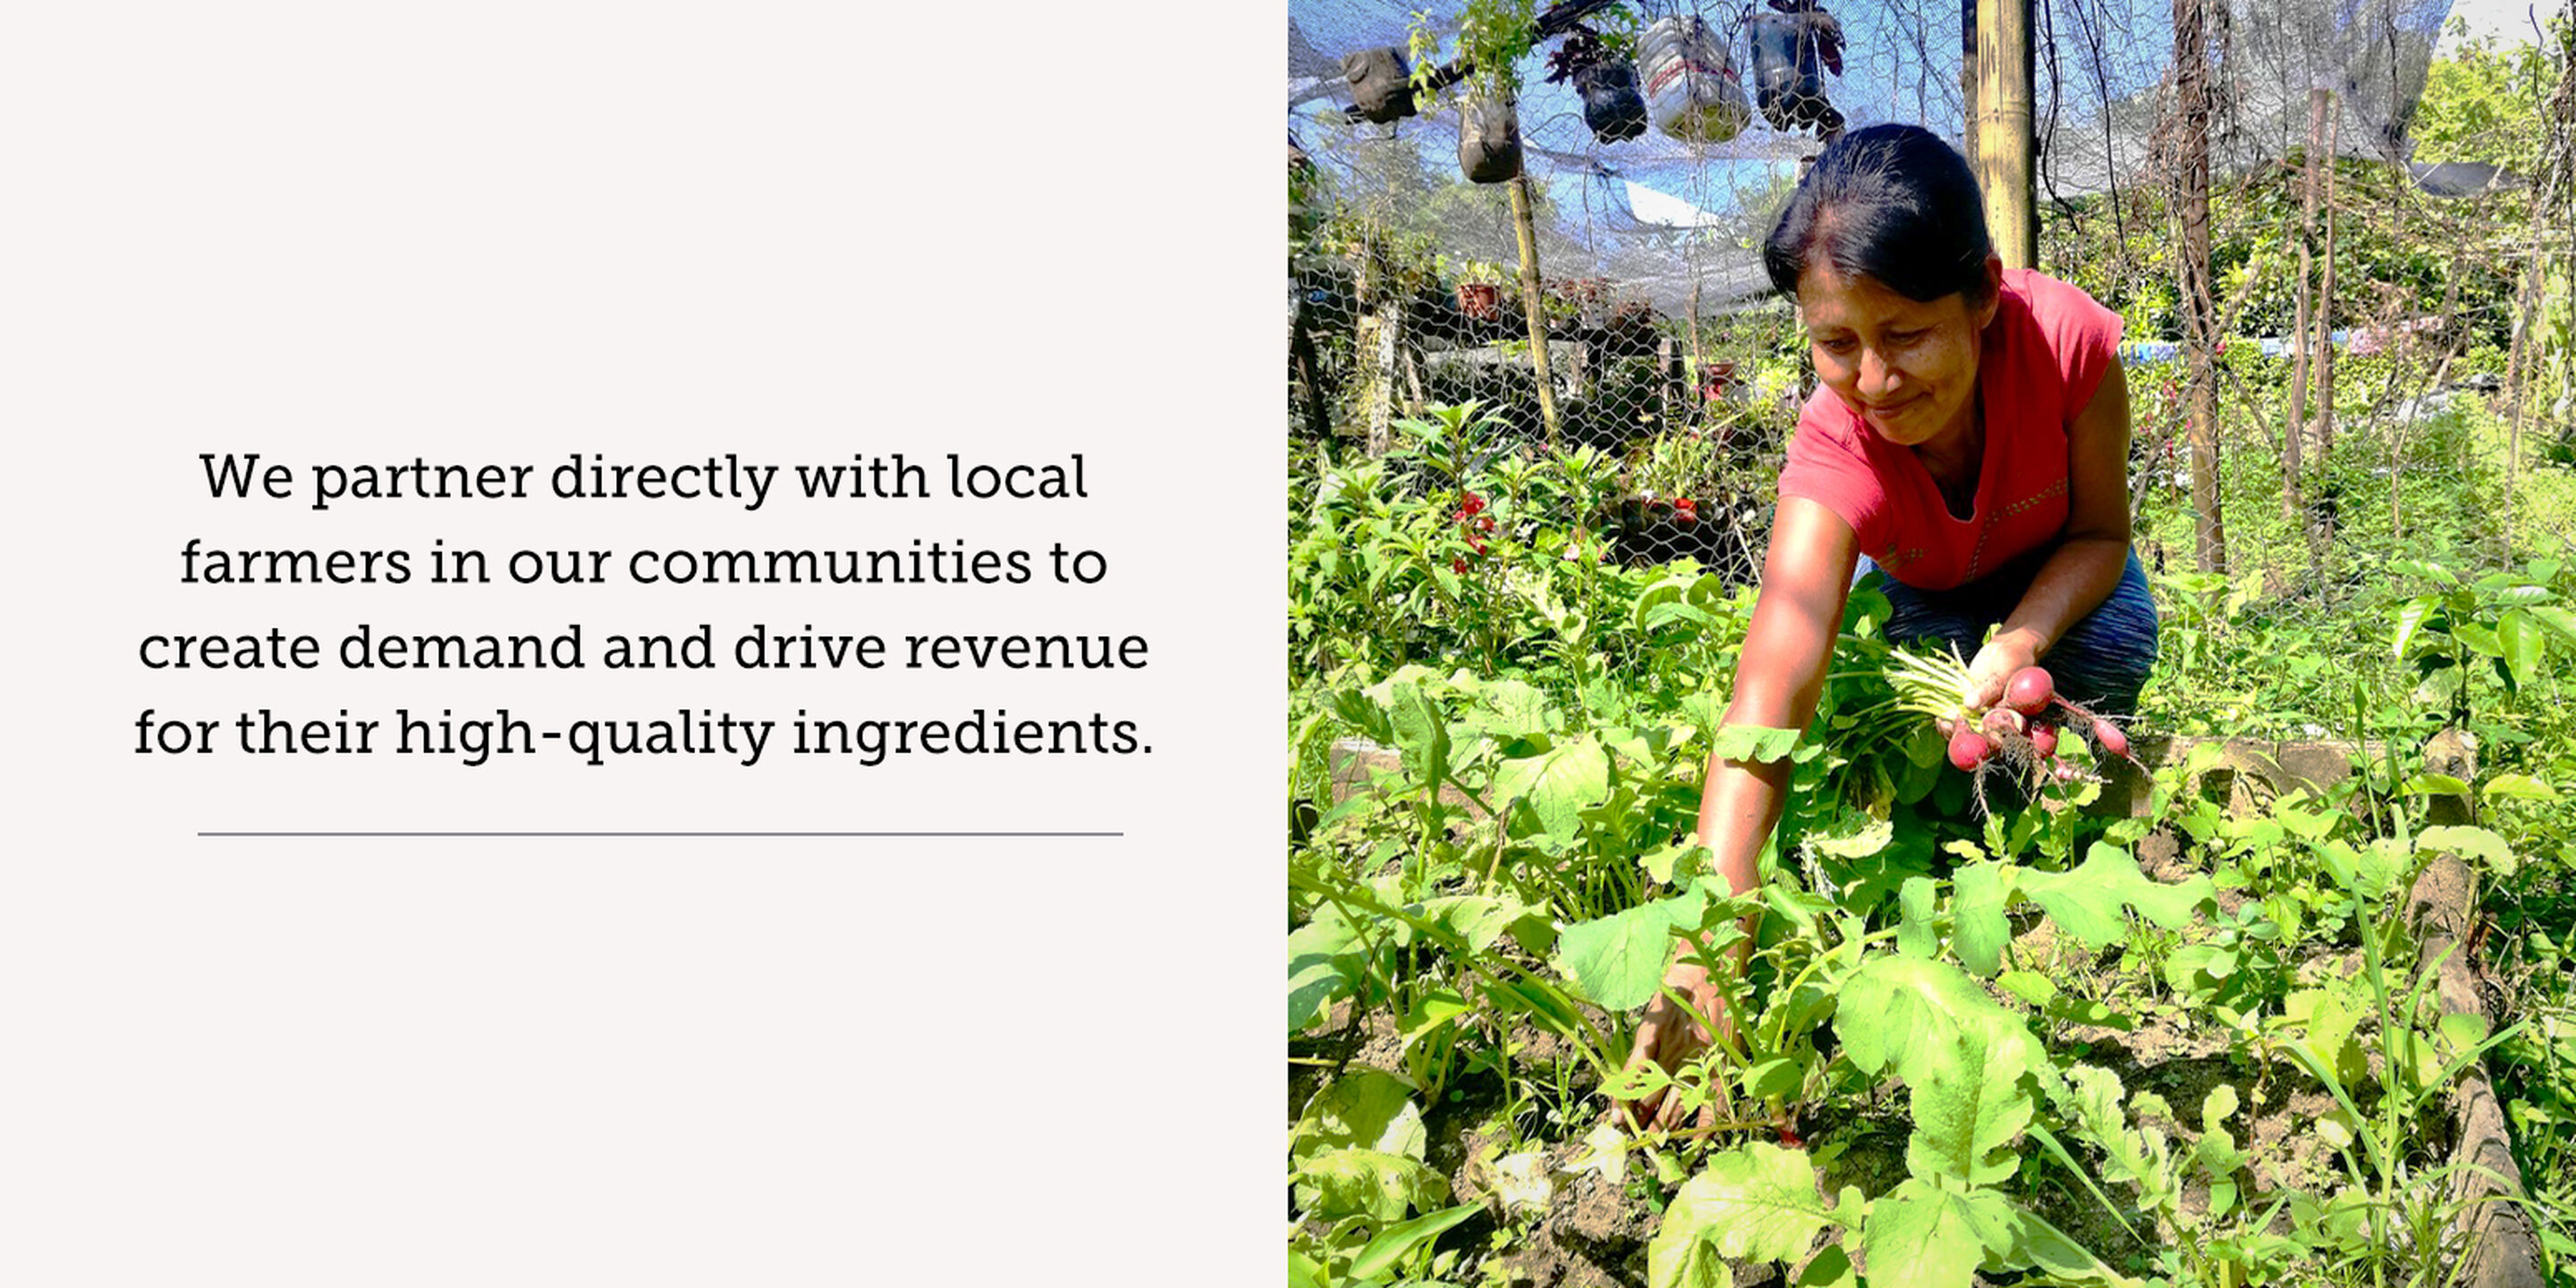 We partner with local farmers in our communities to create demand and drive revenue for their high quality ingredients